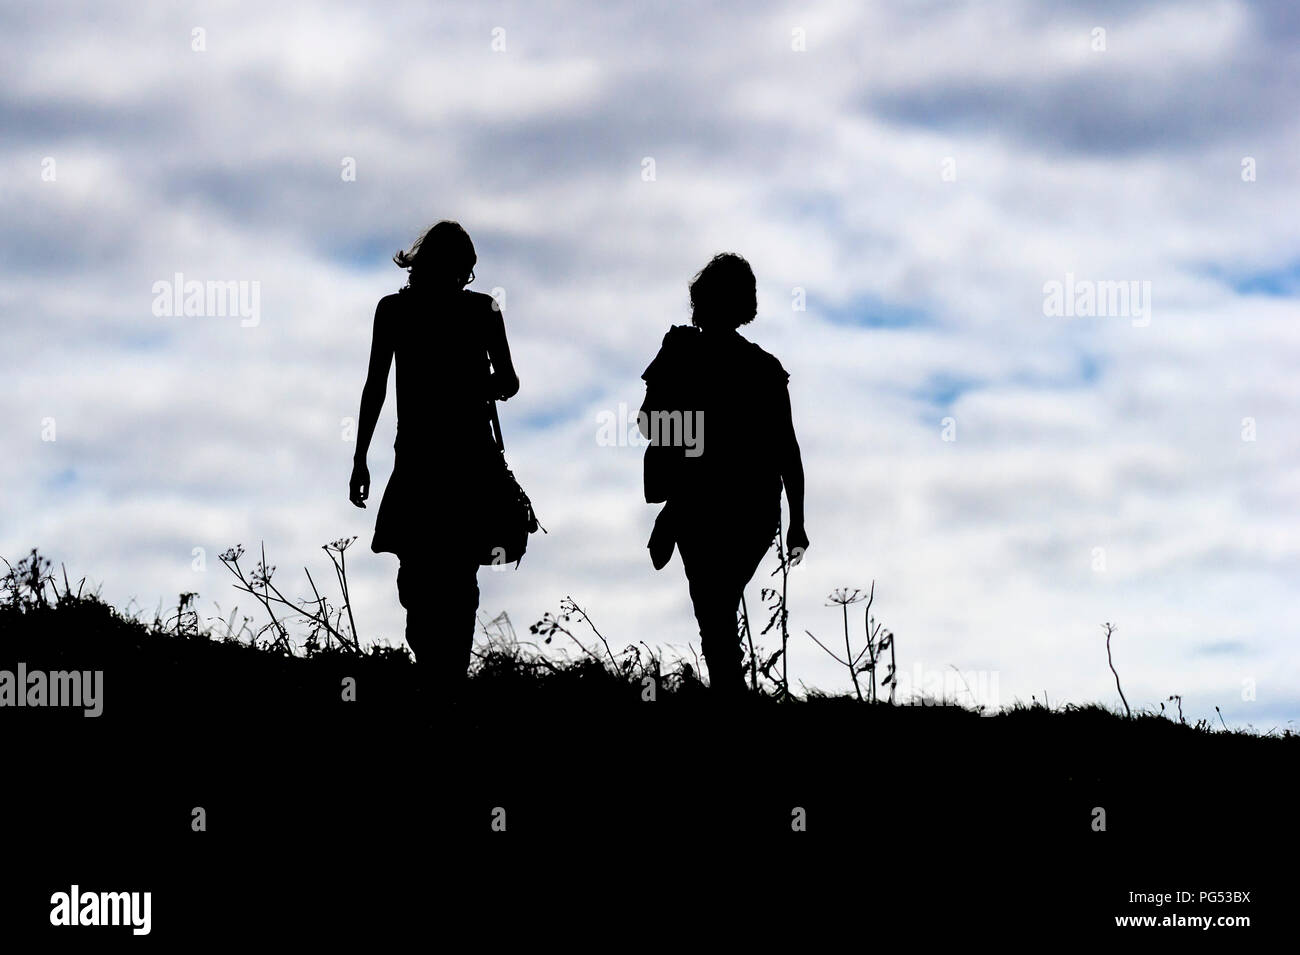 The sillhouette of two people walking together. Stock Photo